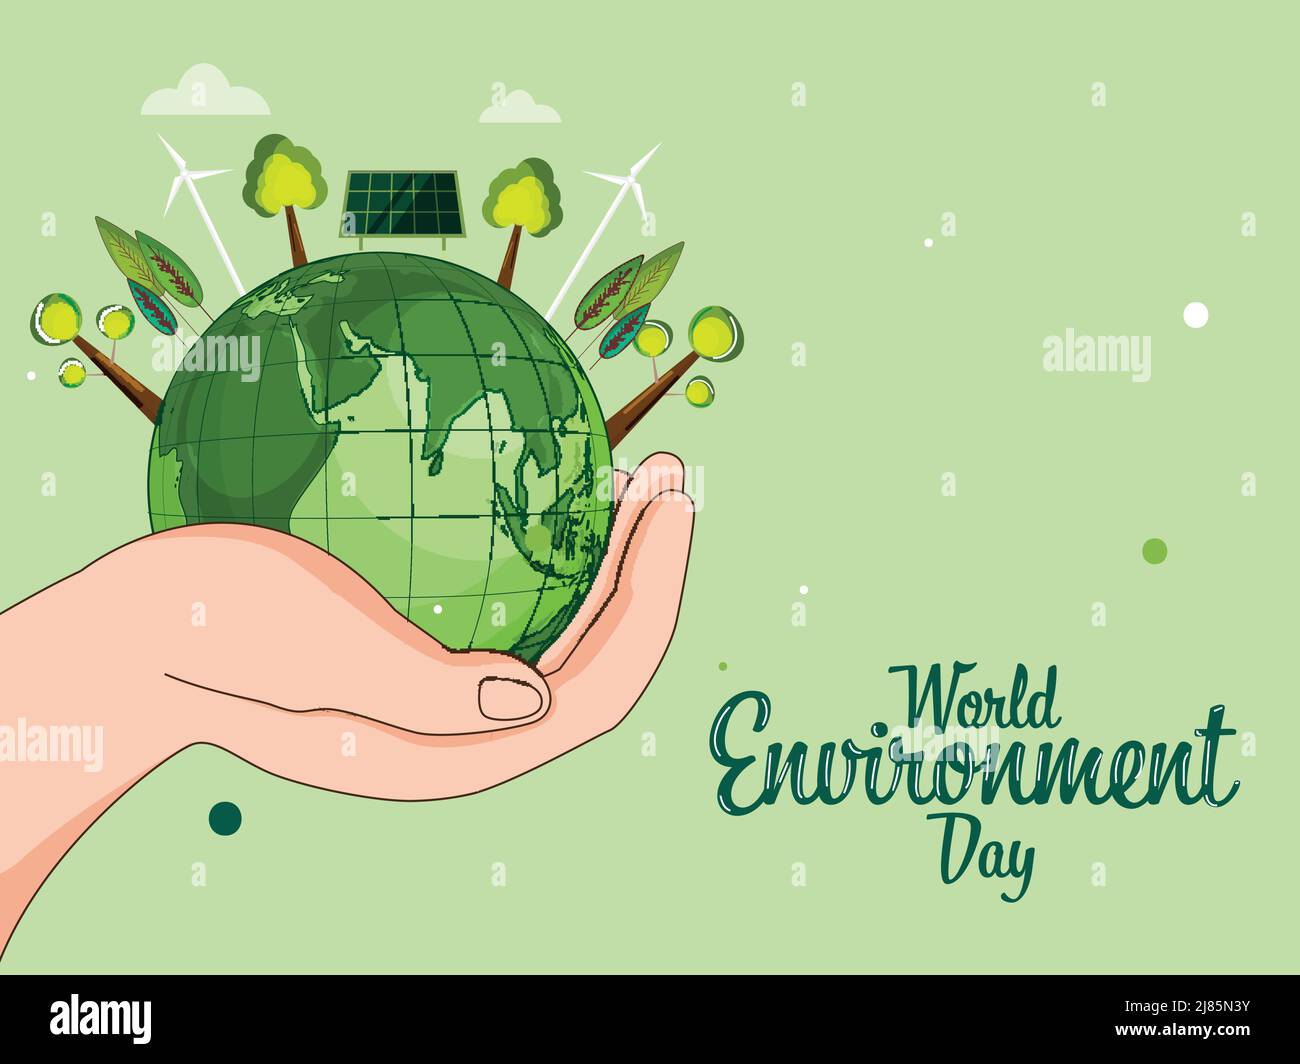 World Environment Day Concept With Human Hand Holding Earth Globe, Trees, Windmills, Solar Panels On Green Background. Stock Vector